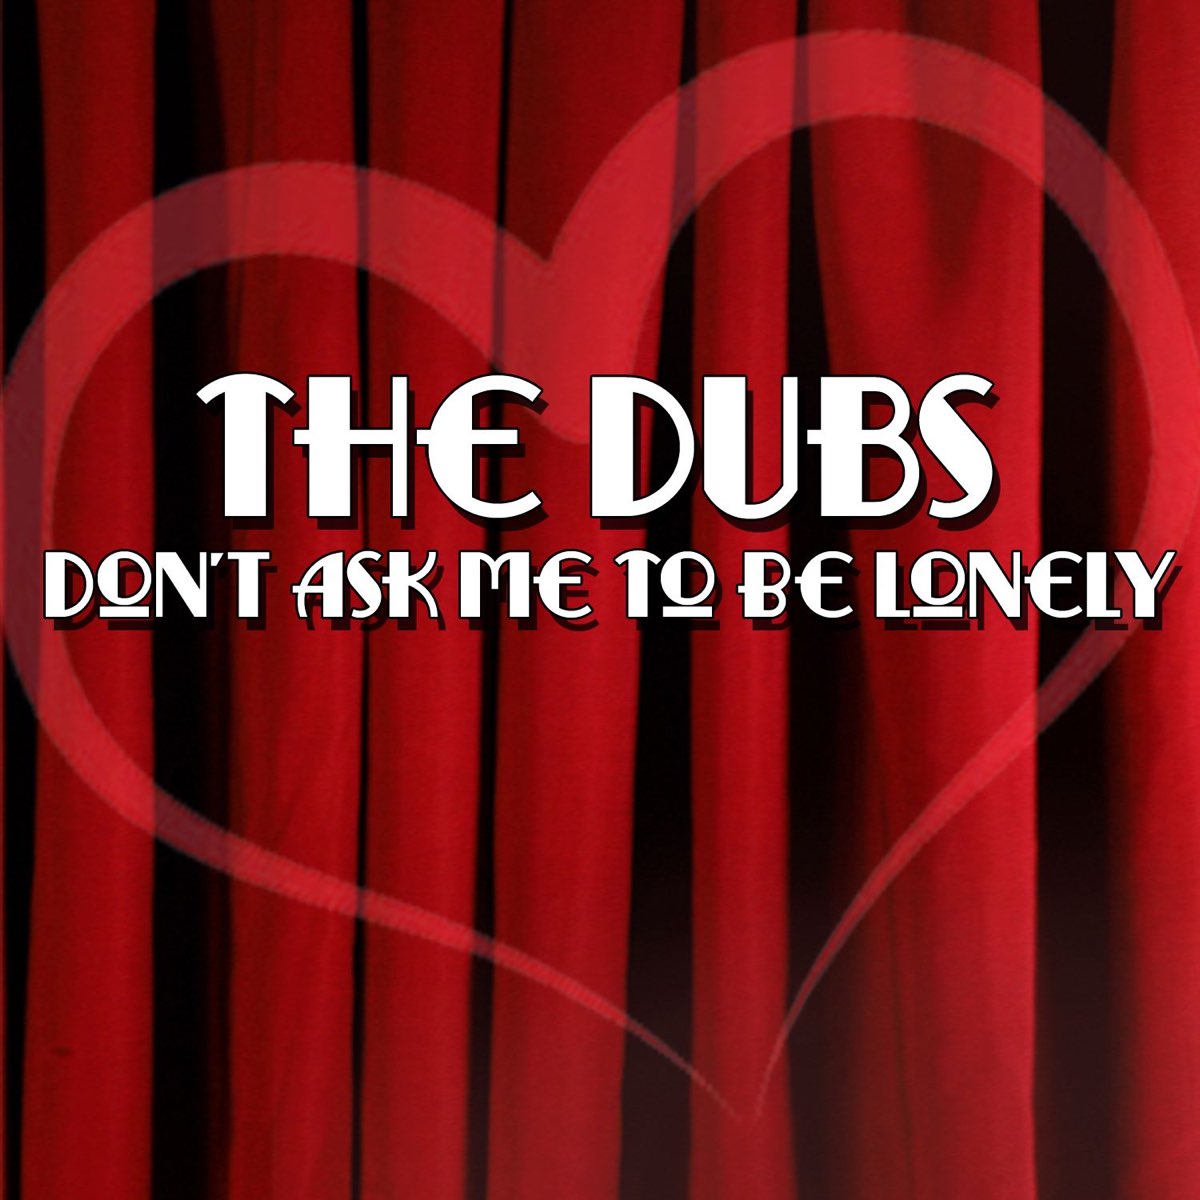 Dont ask. Dubs. Just ask the Lonely.